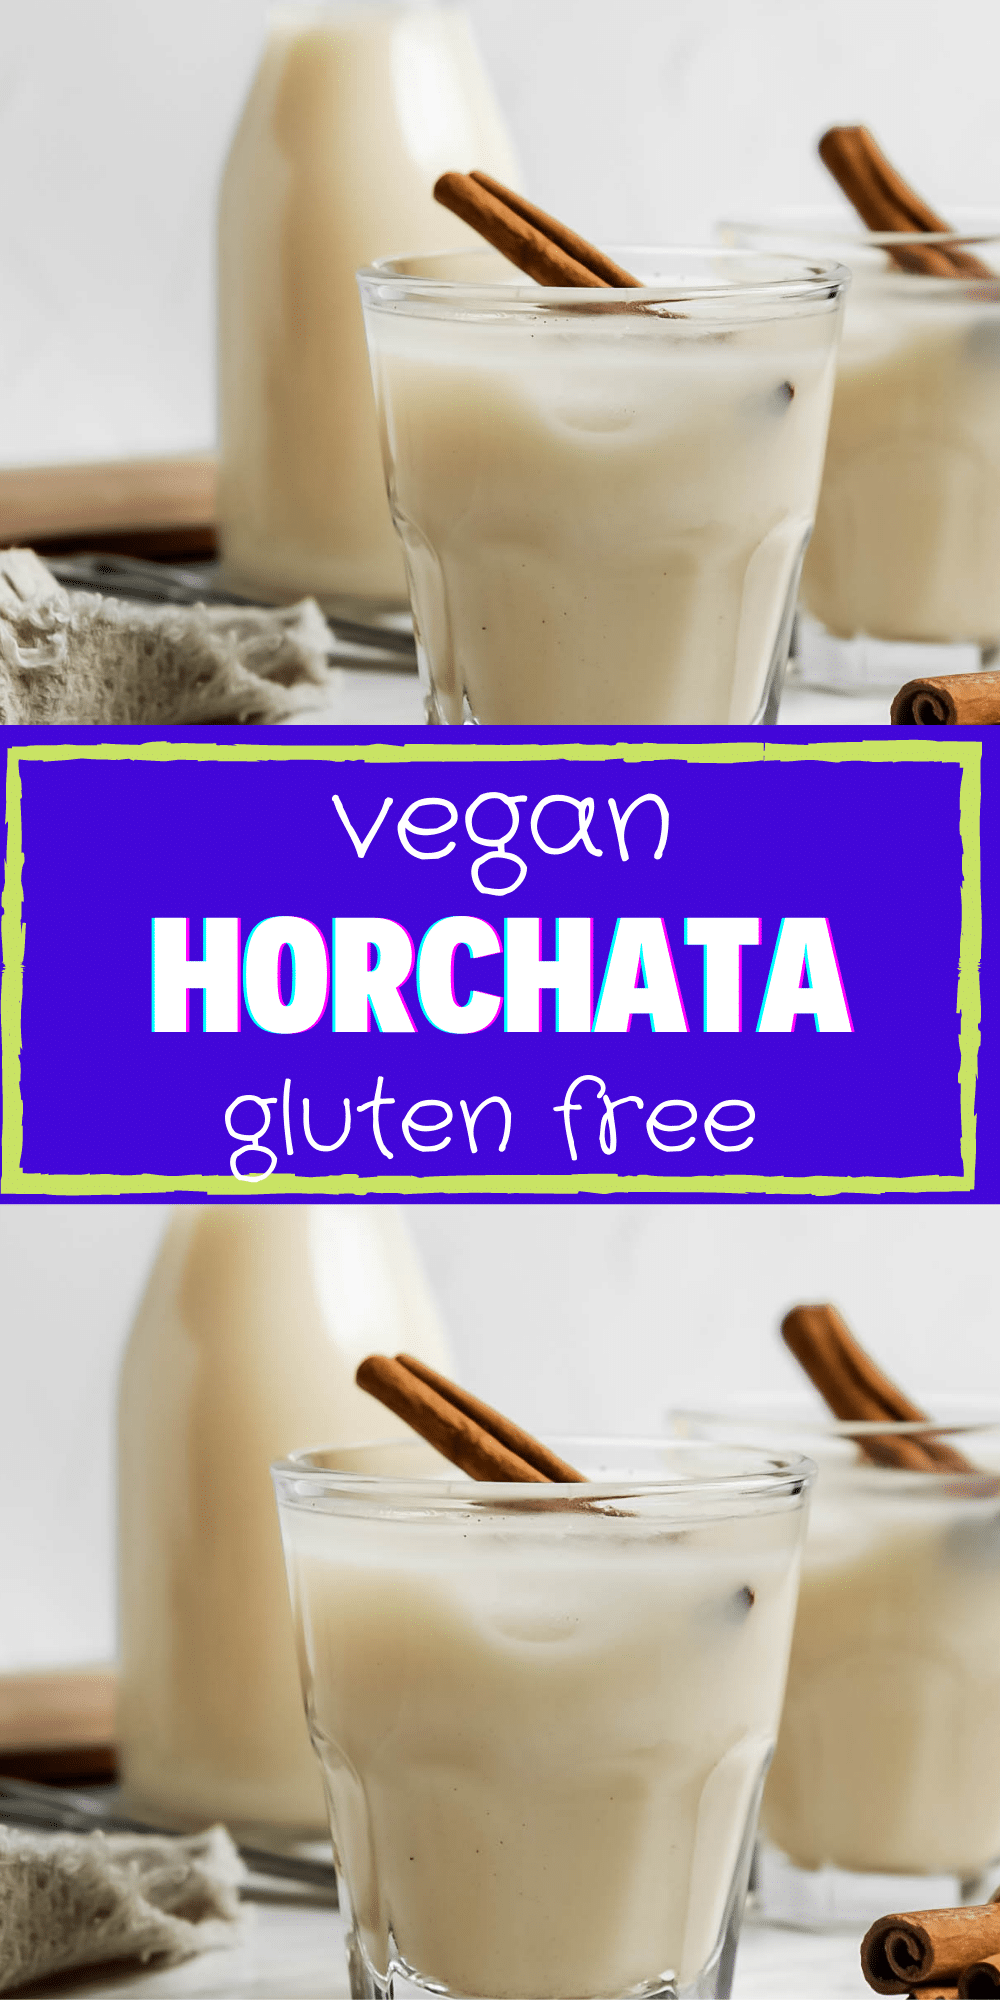 A sweet creamy drink made from rice is delicious, comforting, and so simple to make. Vegan Horchata will be your new favorite plant-based specialty drink!